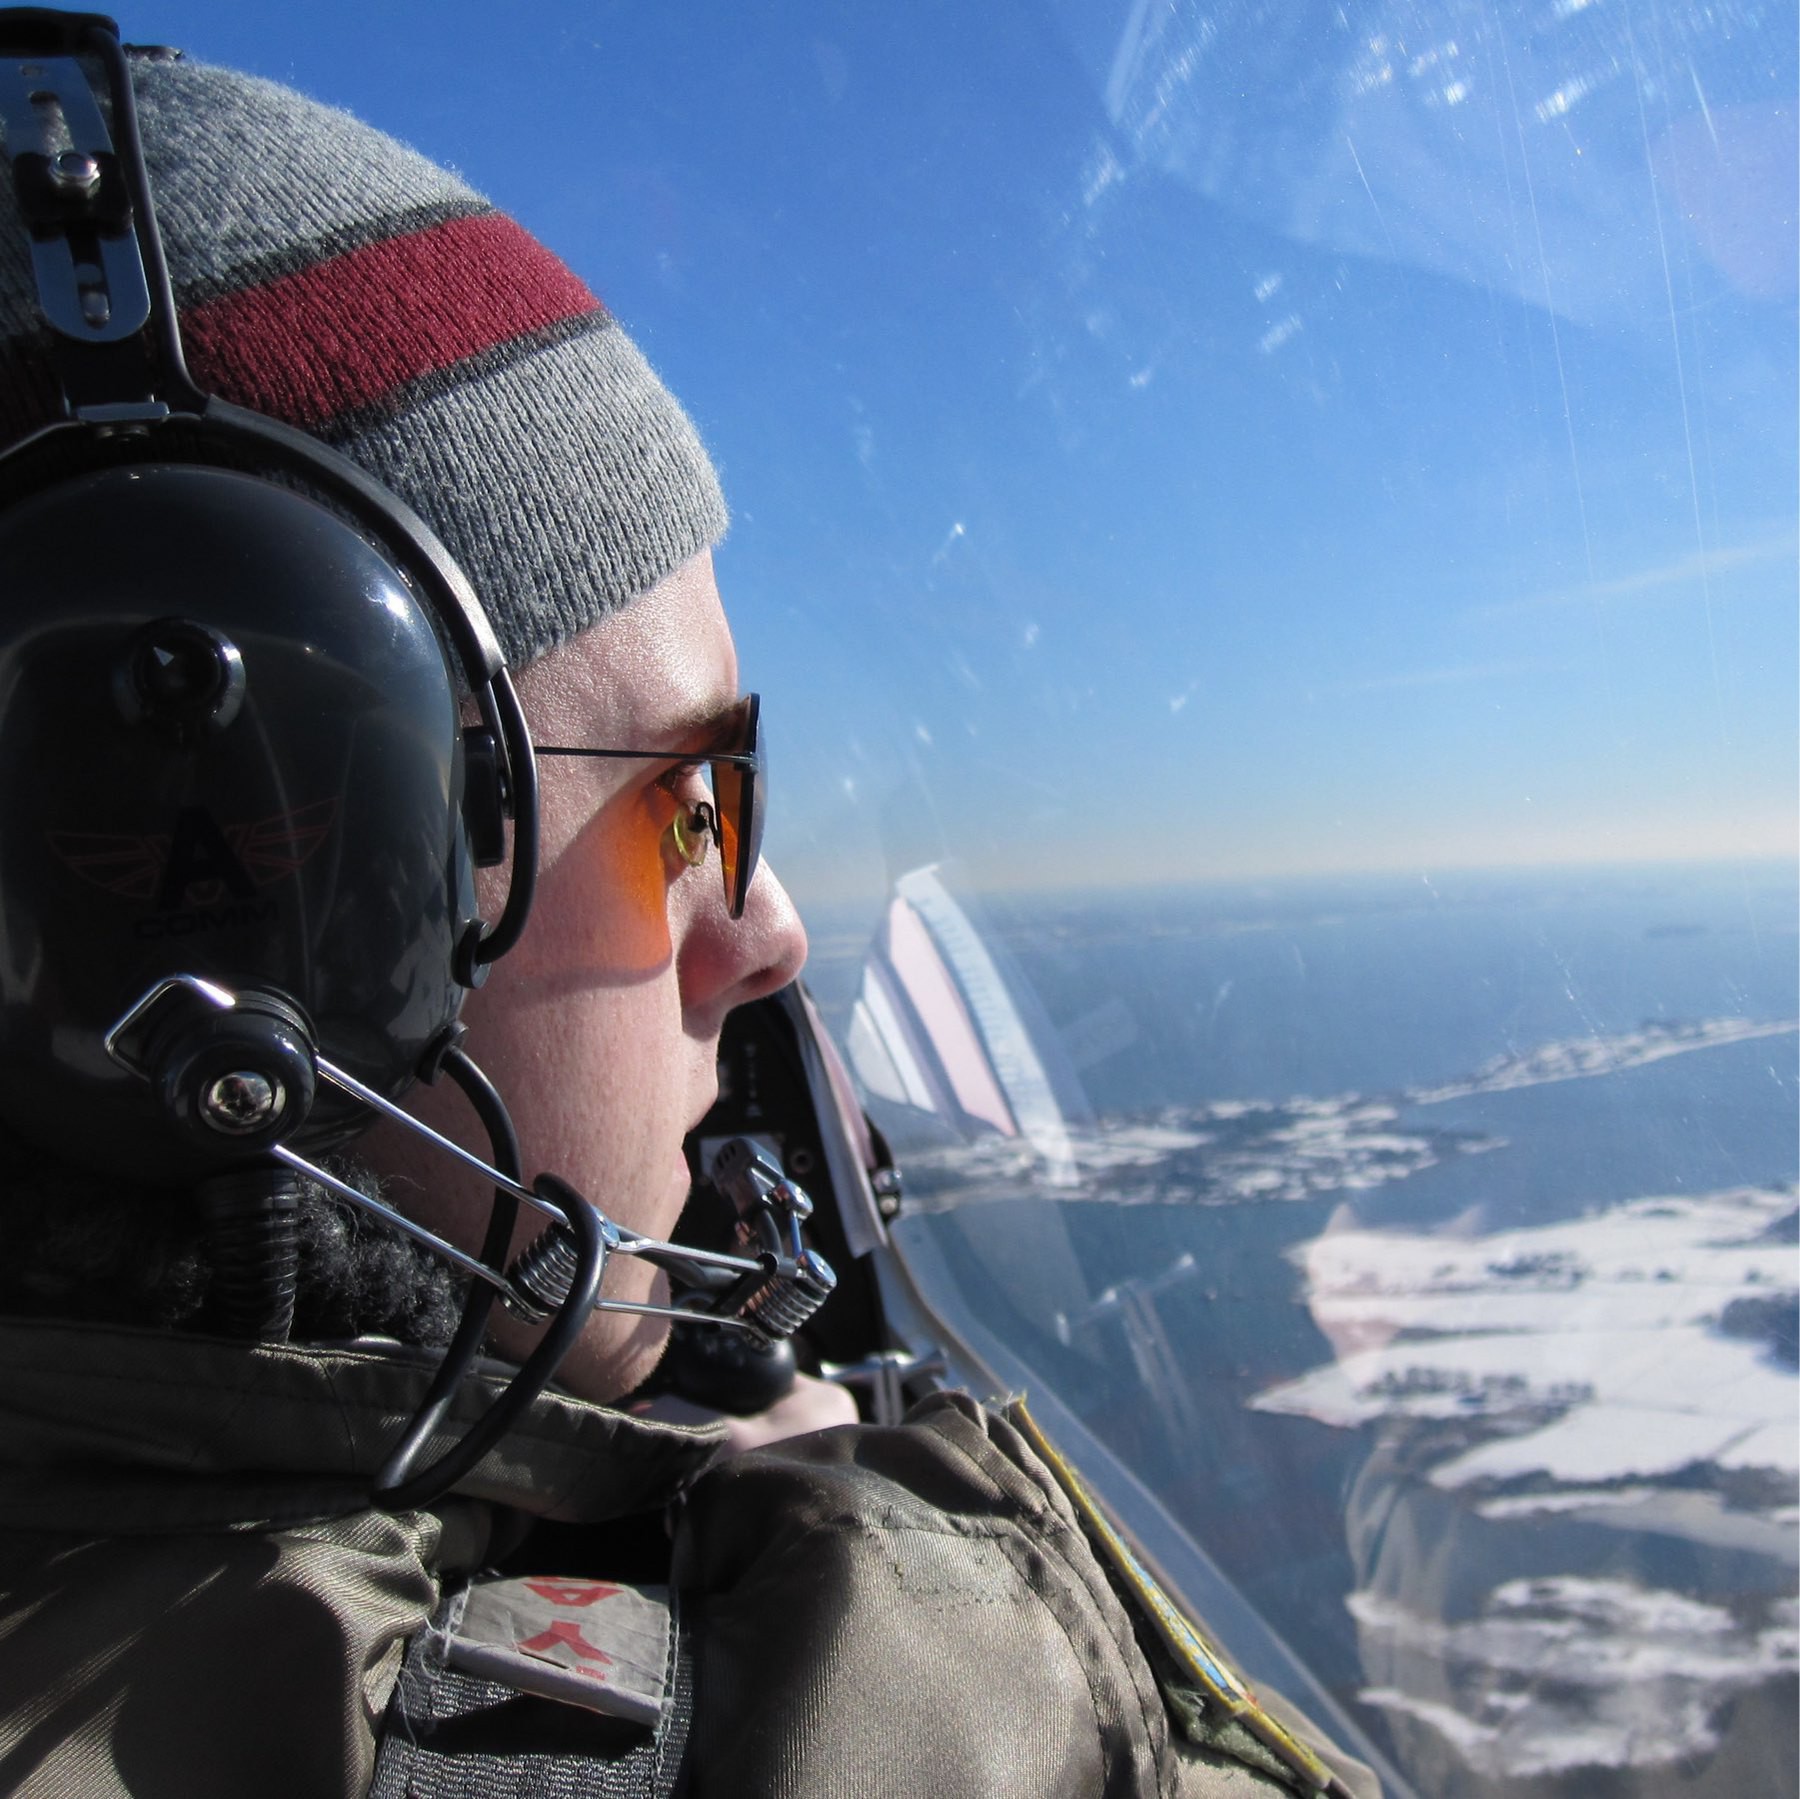 Chet flying an airplane over snow-covered terrain.